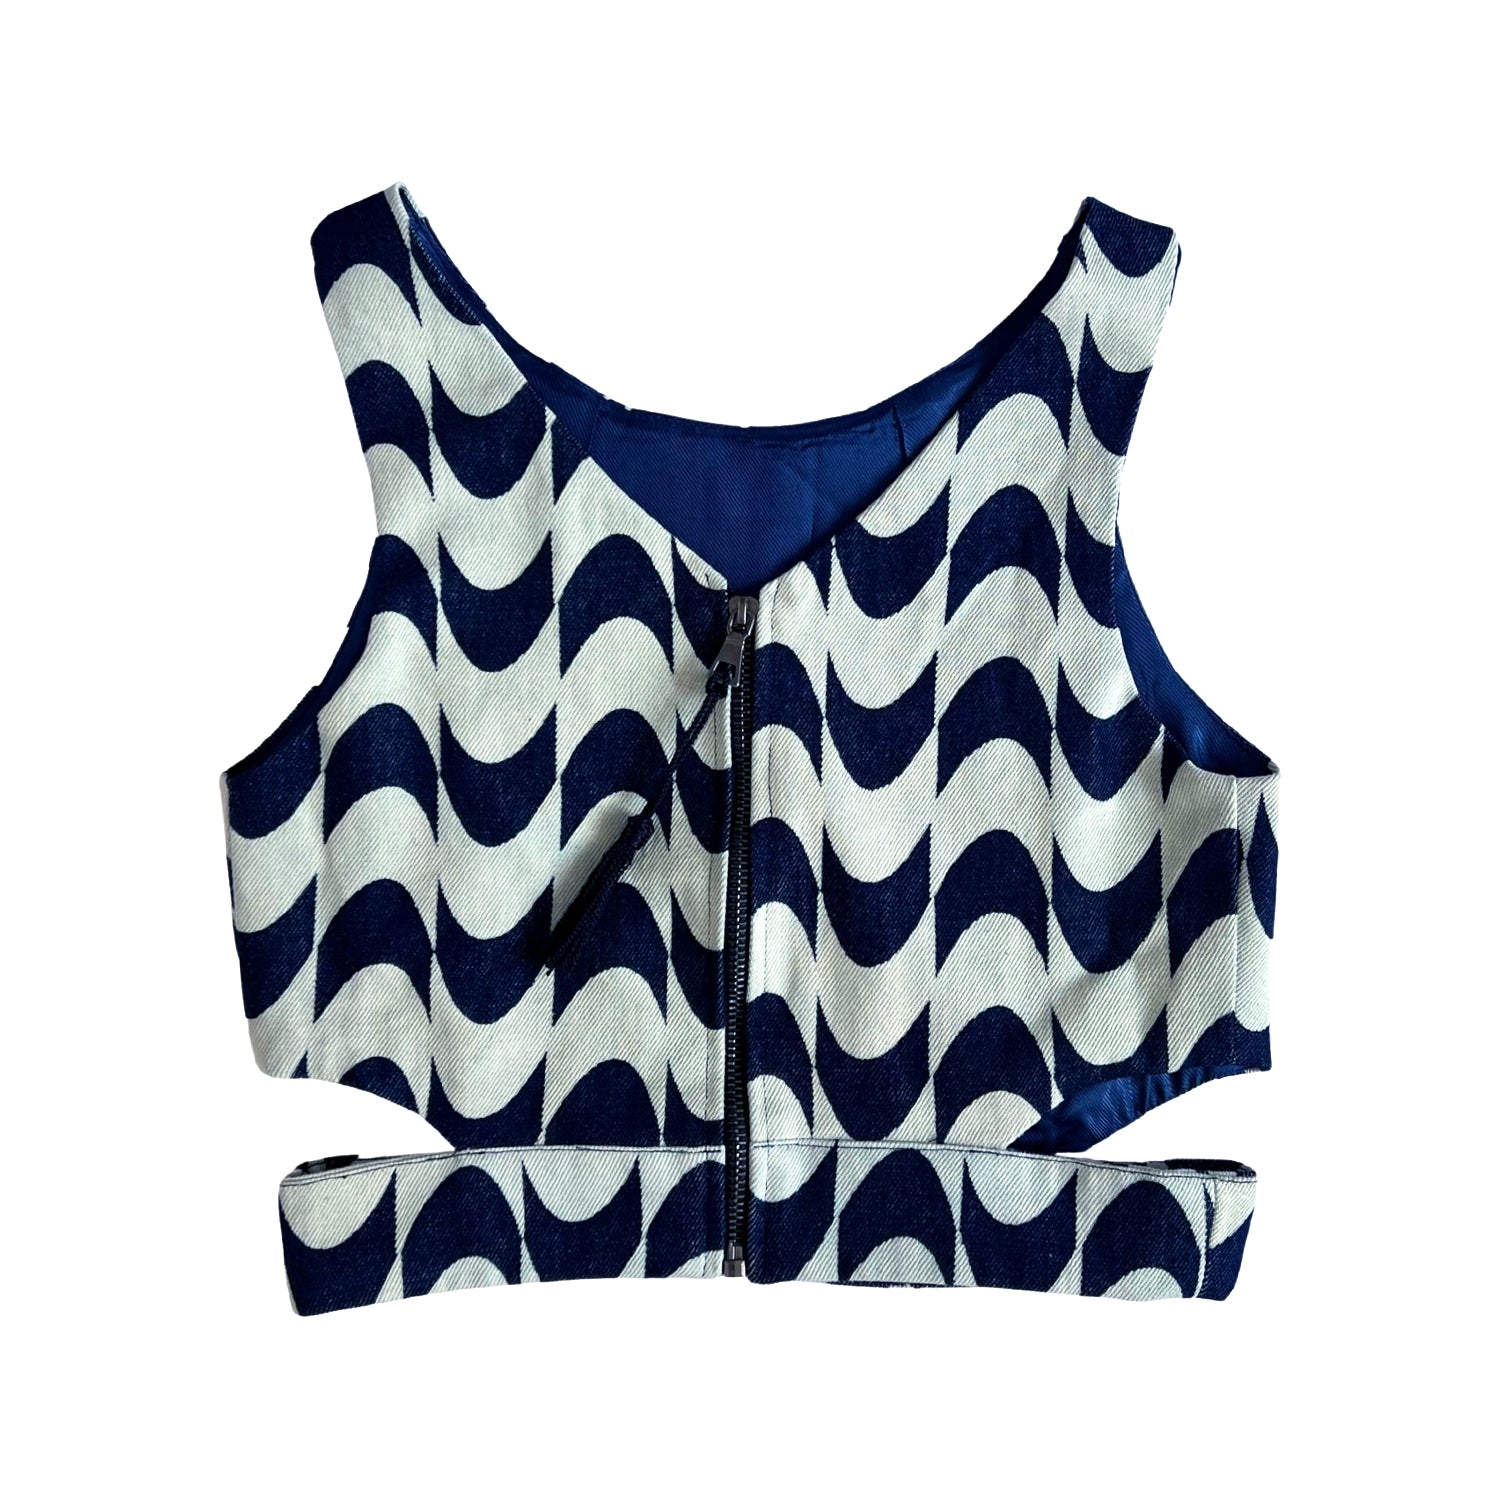 Printed Denim Crop Top with Cut Outs in Blue